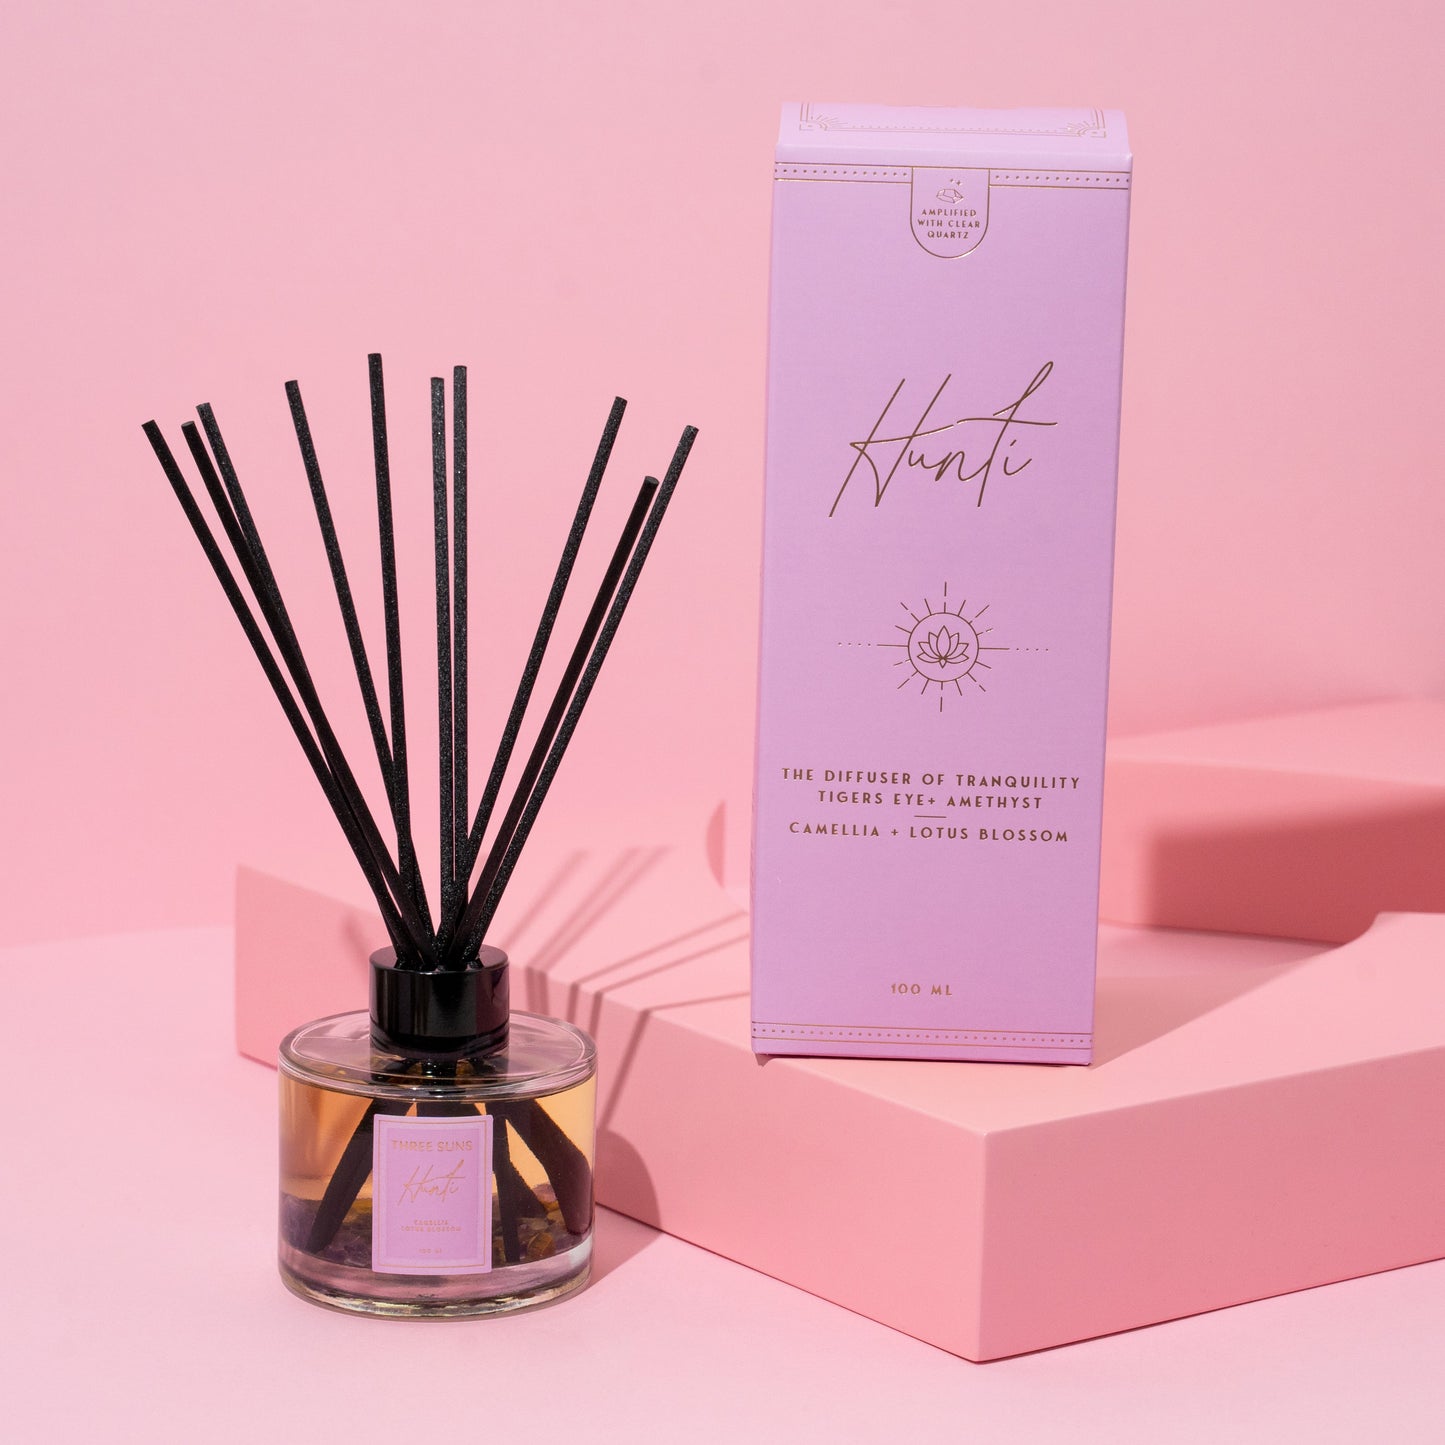 Hunti' | 100ml Diffuser of Tranquility | Camellia + Lotus Blossom